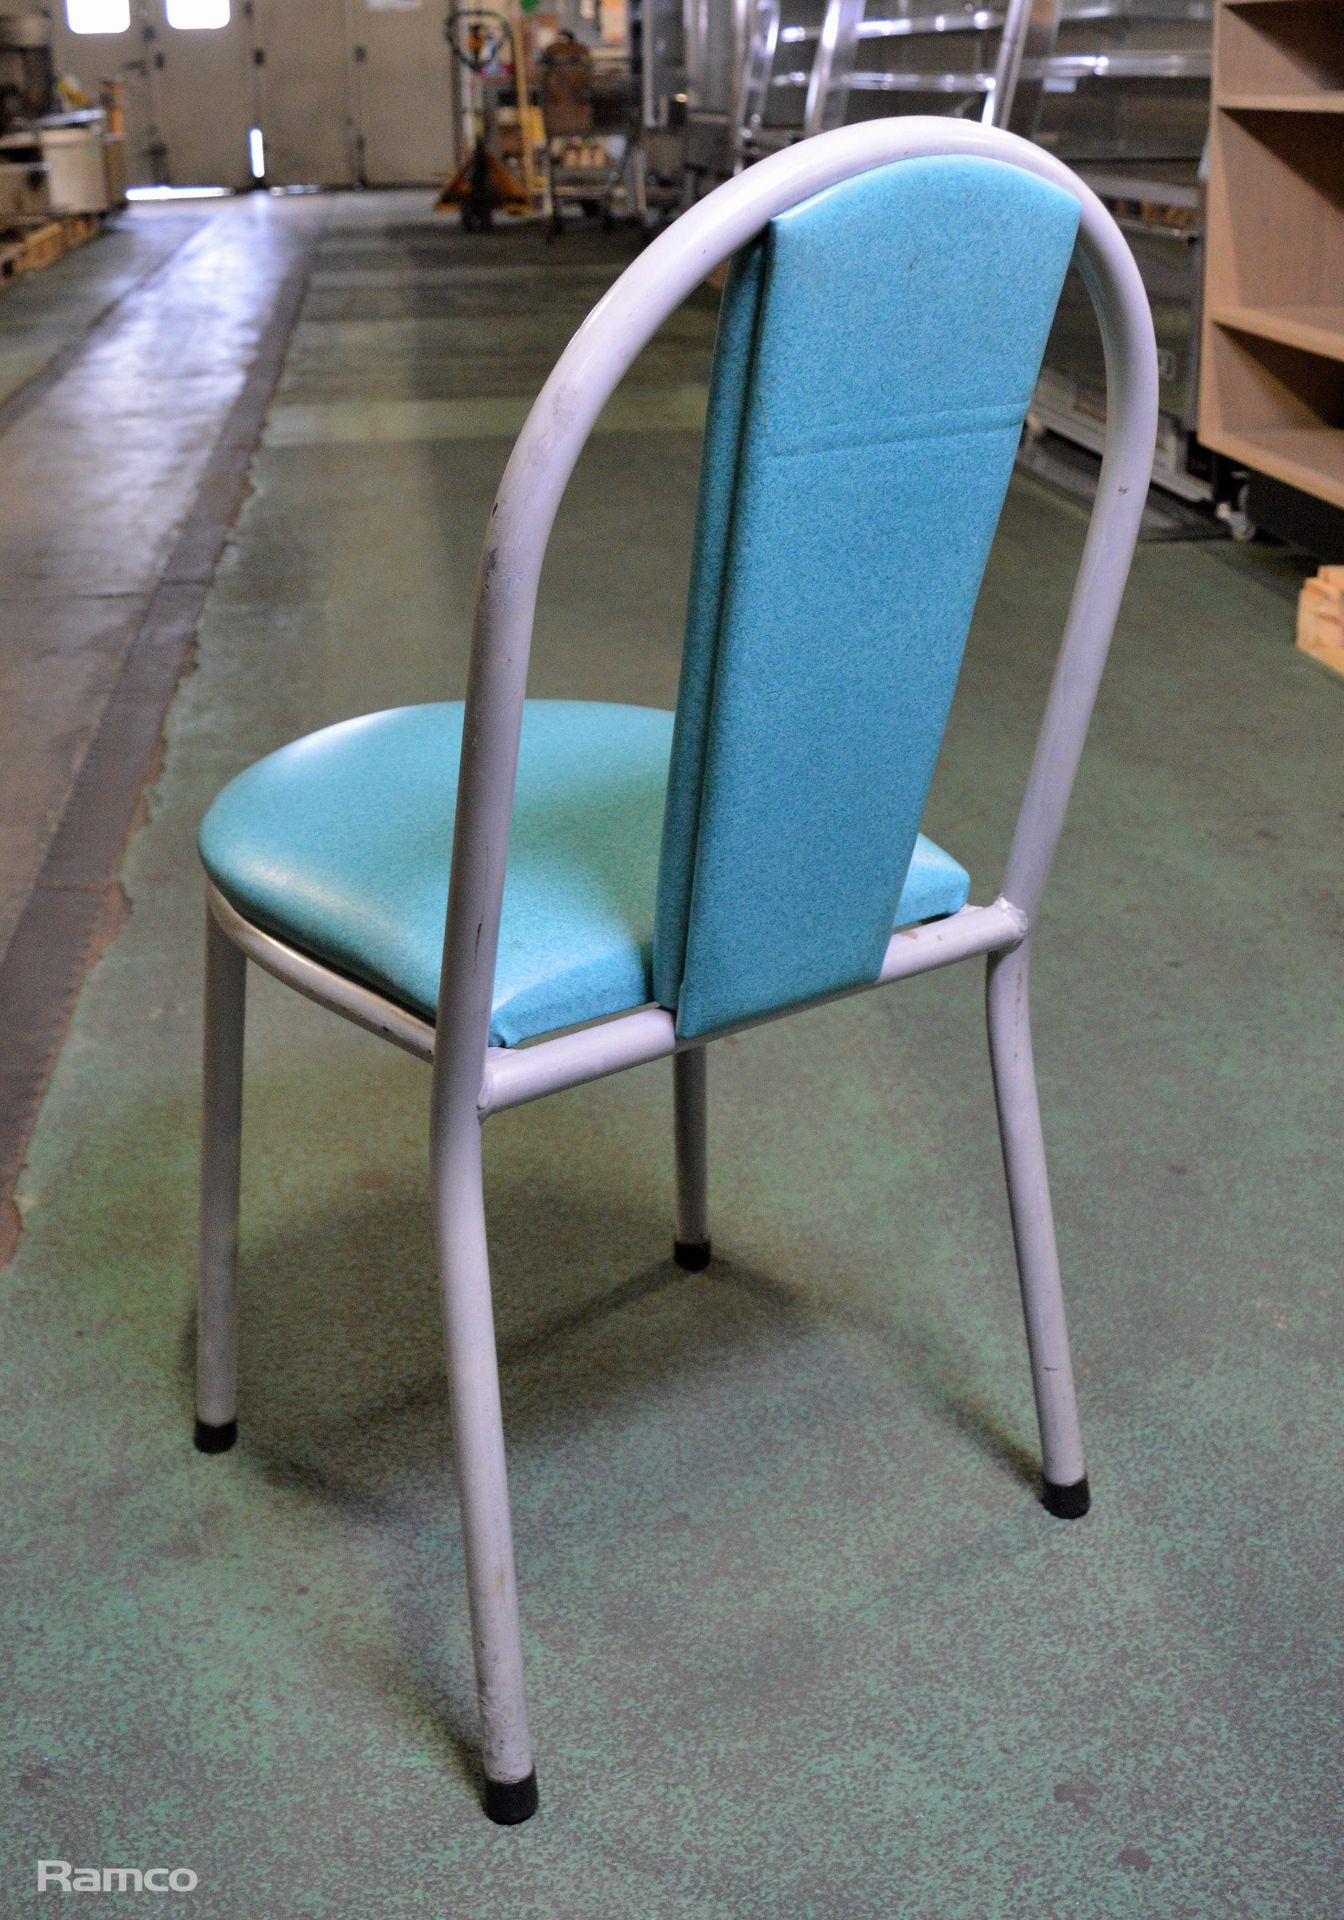 24x Chair Gray Metal Frame with green Padded Seats - Image 4 of 5